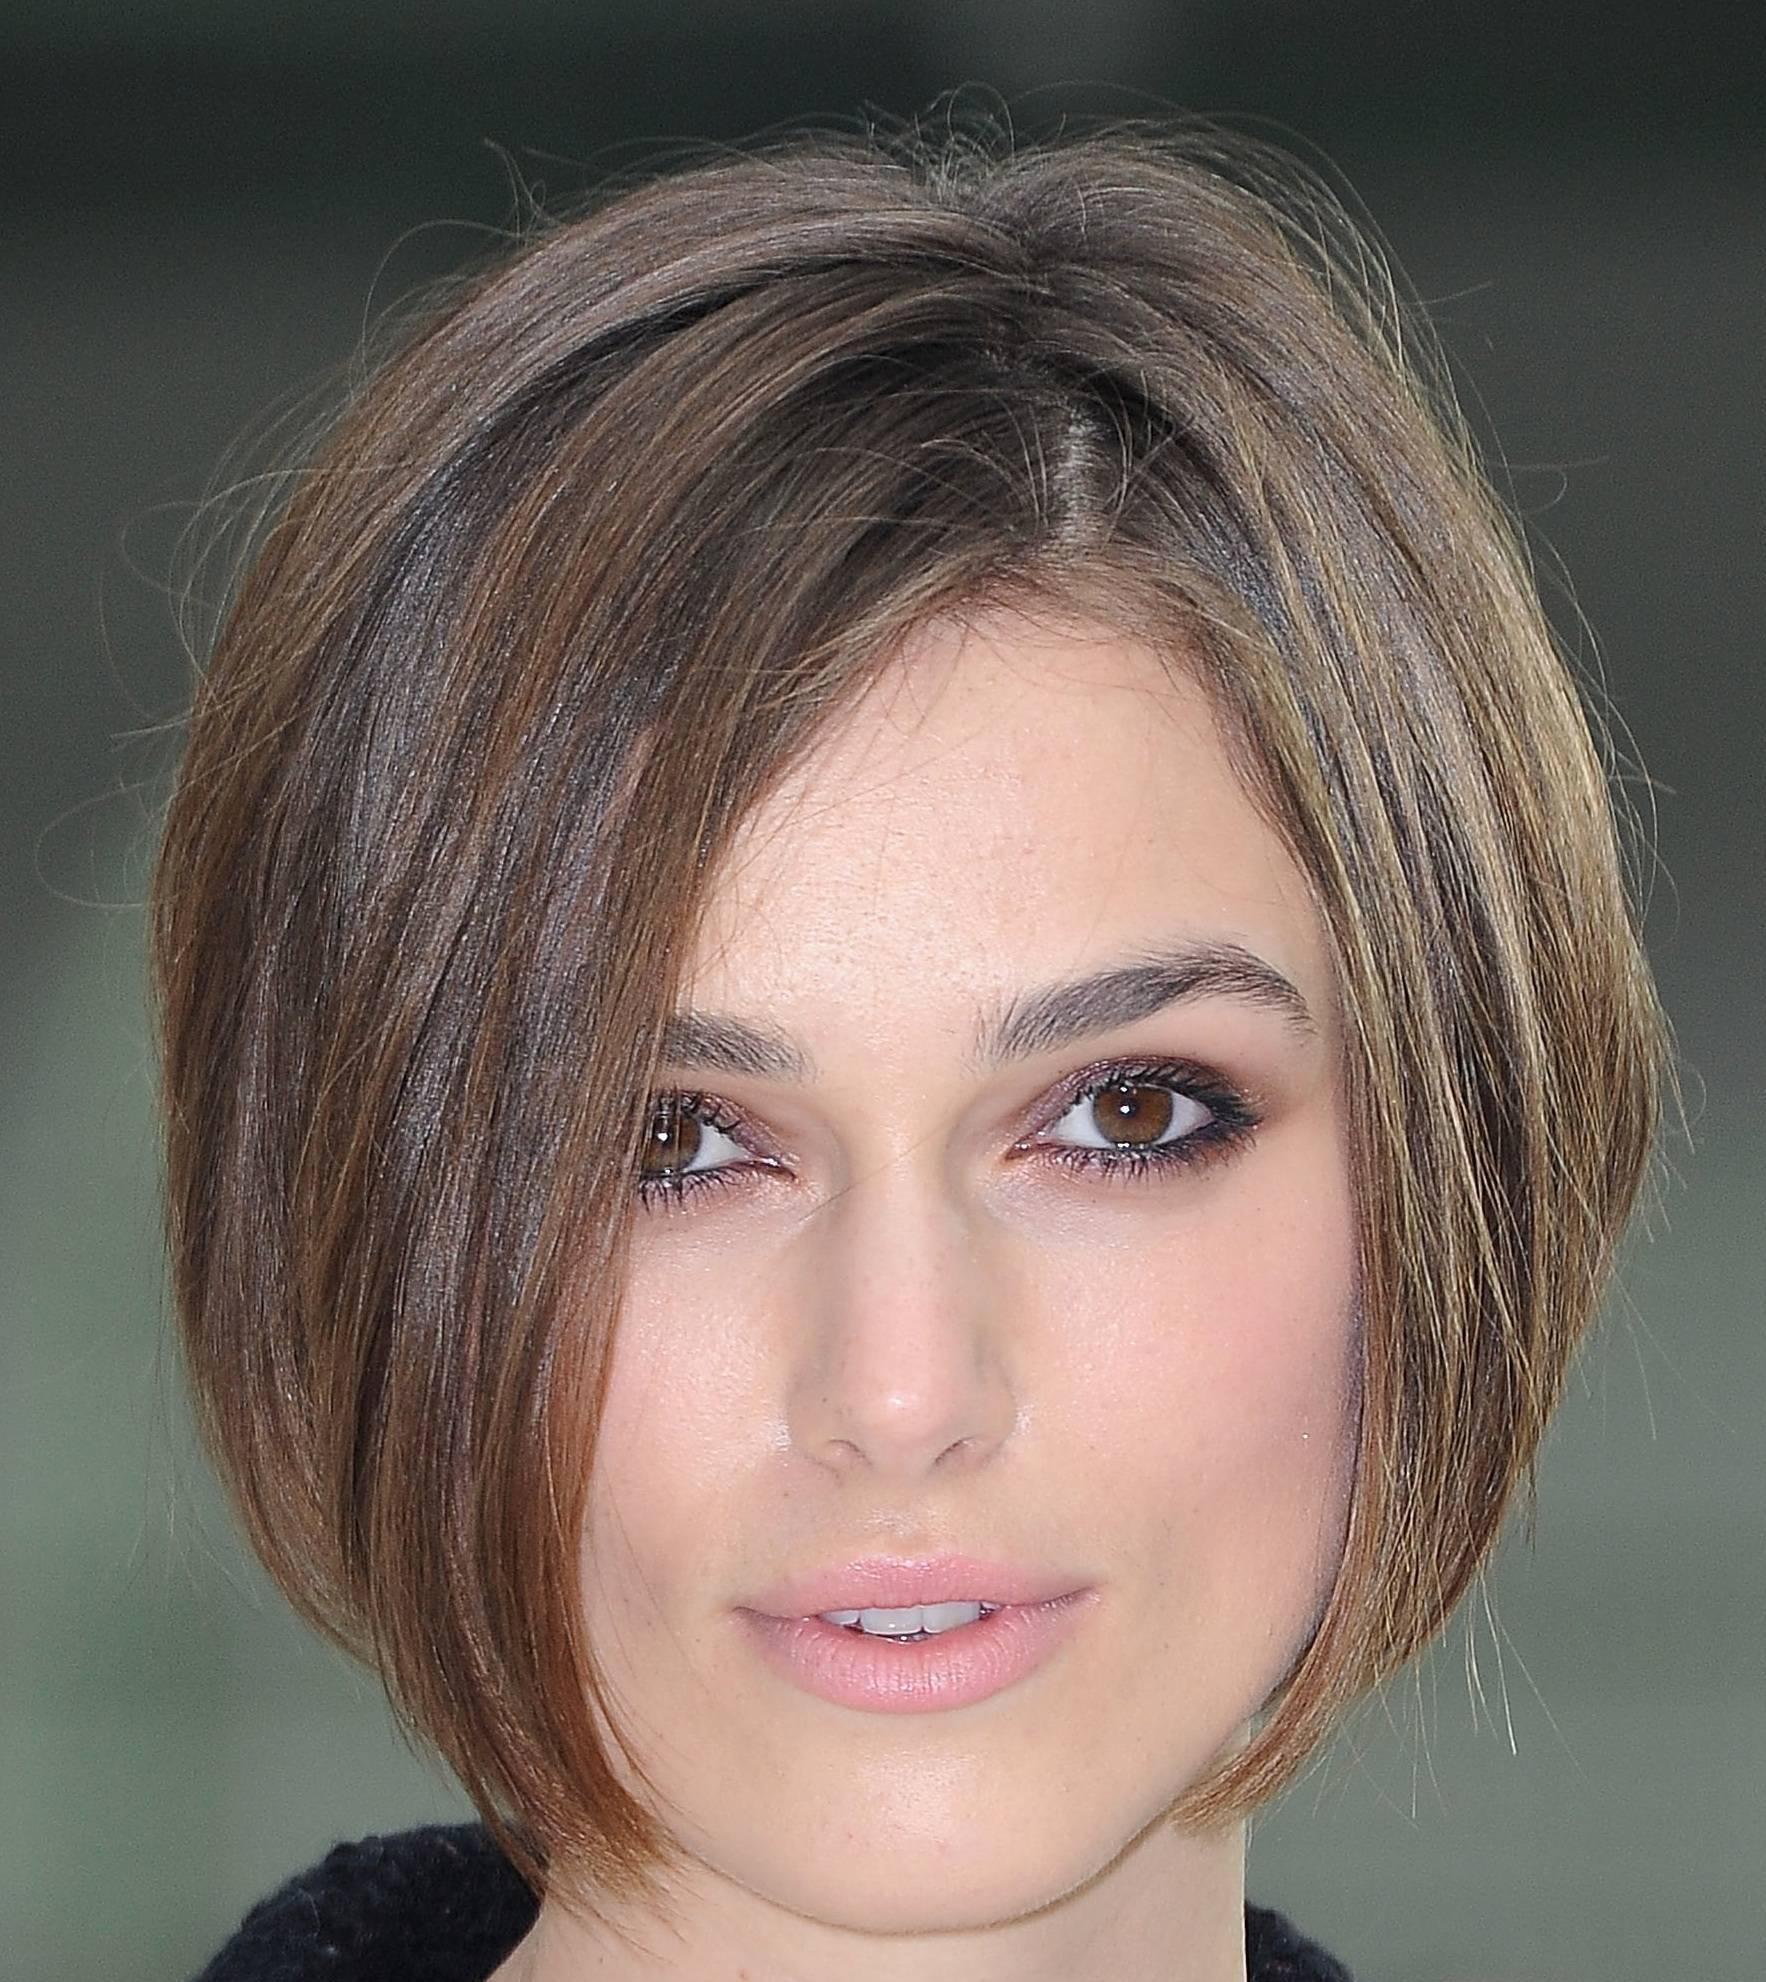 14 Styling your new hairstyles with bangs a beautiful way